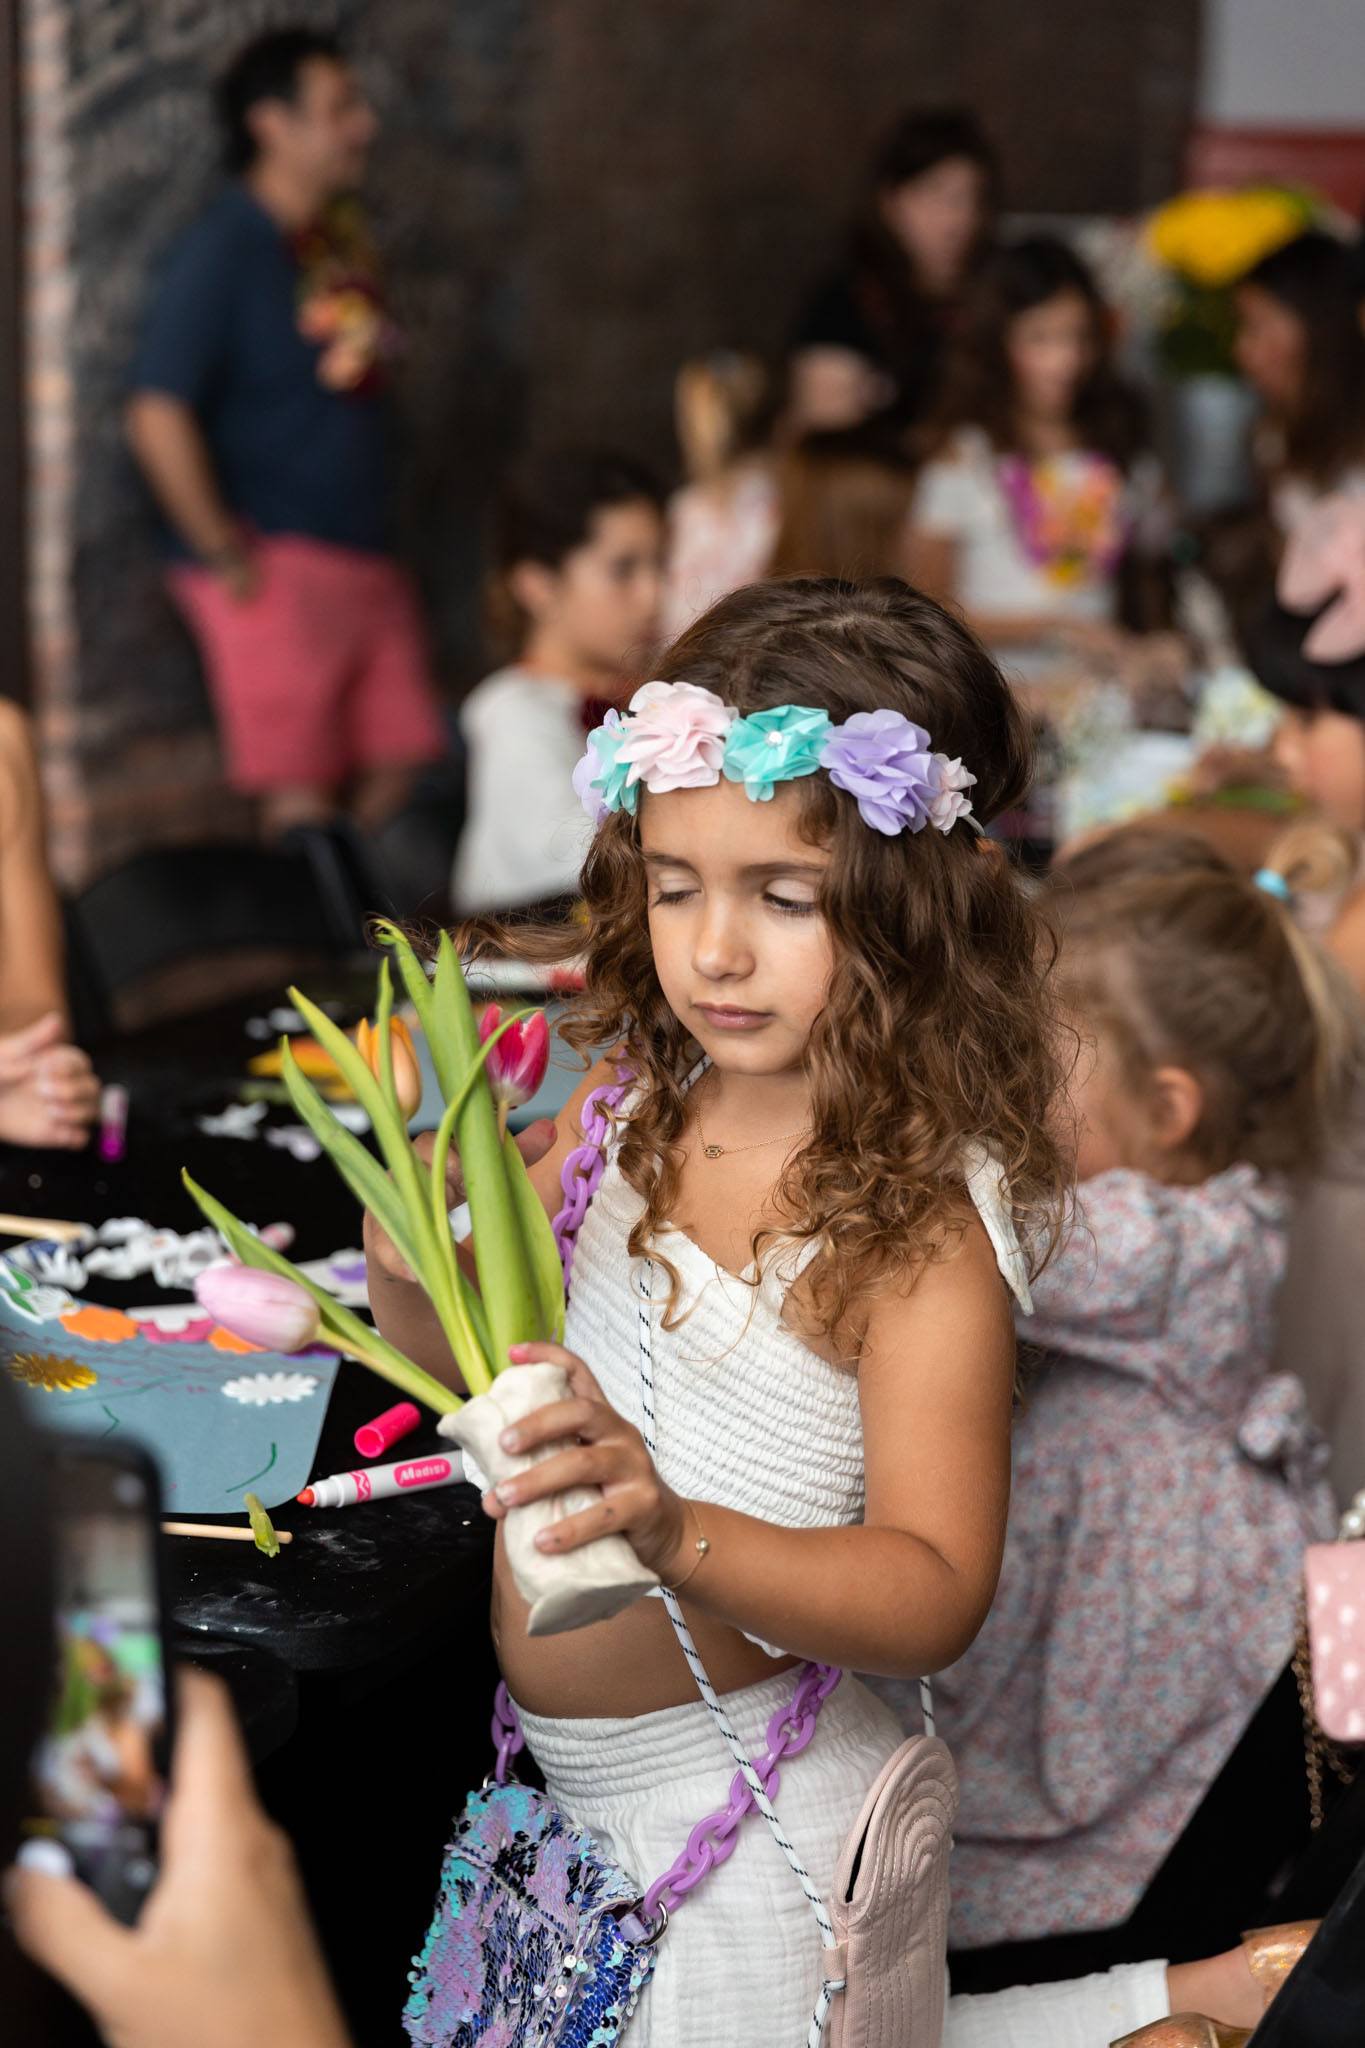 Child wearing a floral crown and admiring her clay floral vase